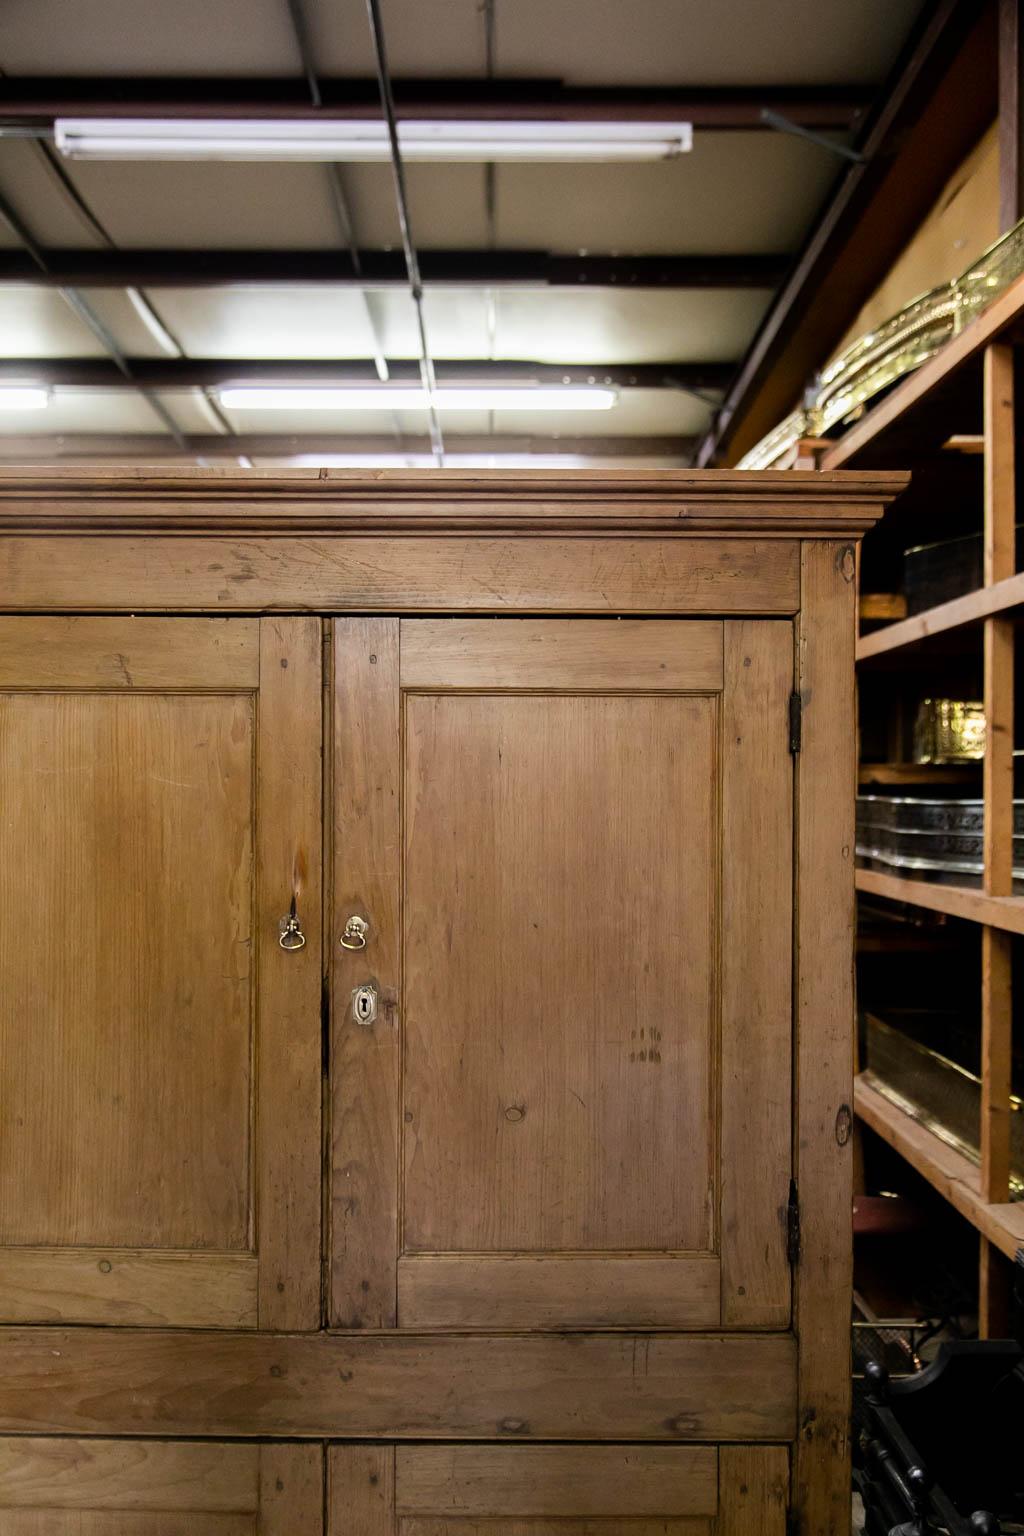 The upper section of this pine cupboard has one fixed shelf while the lower section is open. There is exposed peg construction. The doors have recessed panels with carved shaped molded edges. The brass hardware is later.